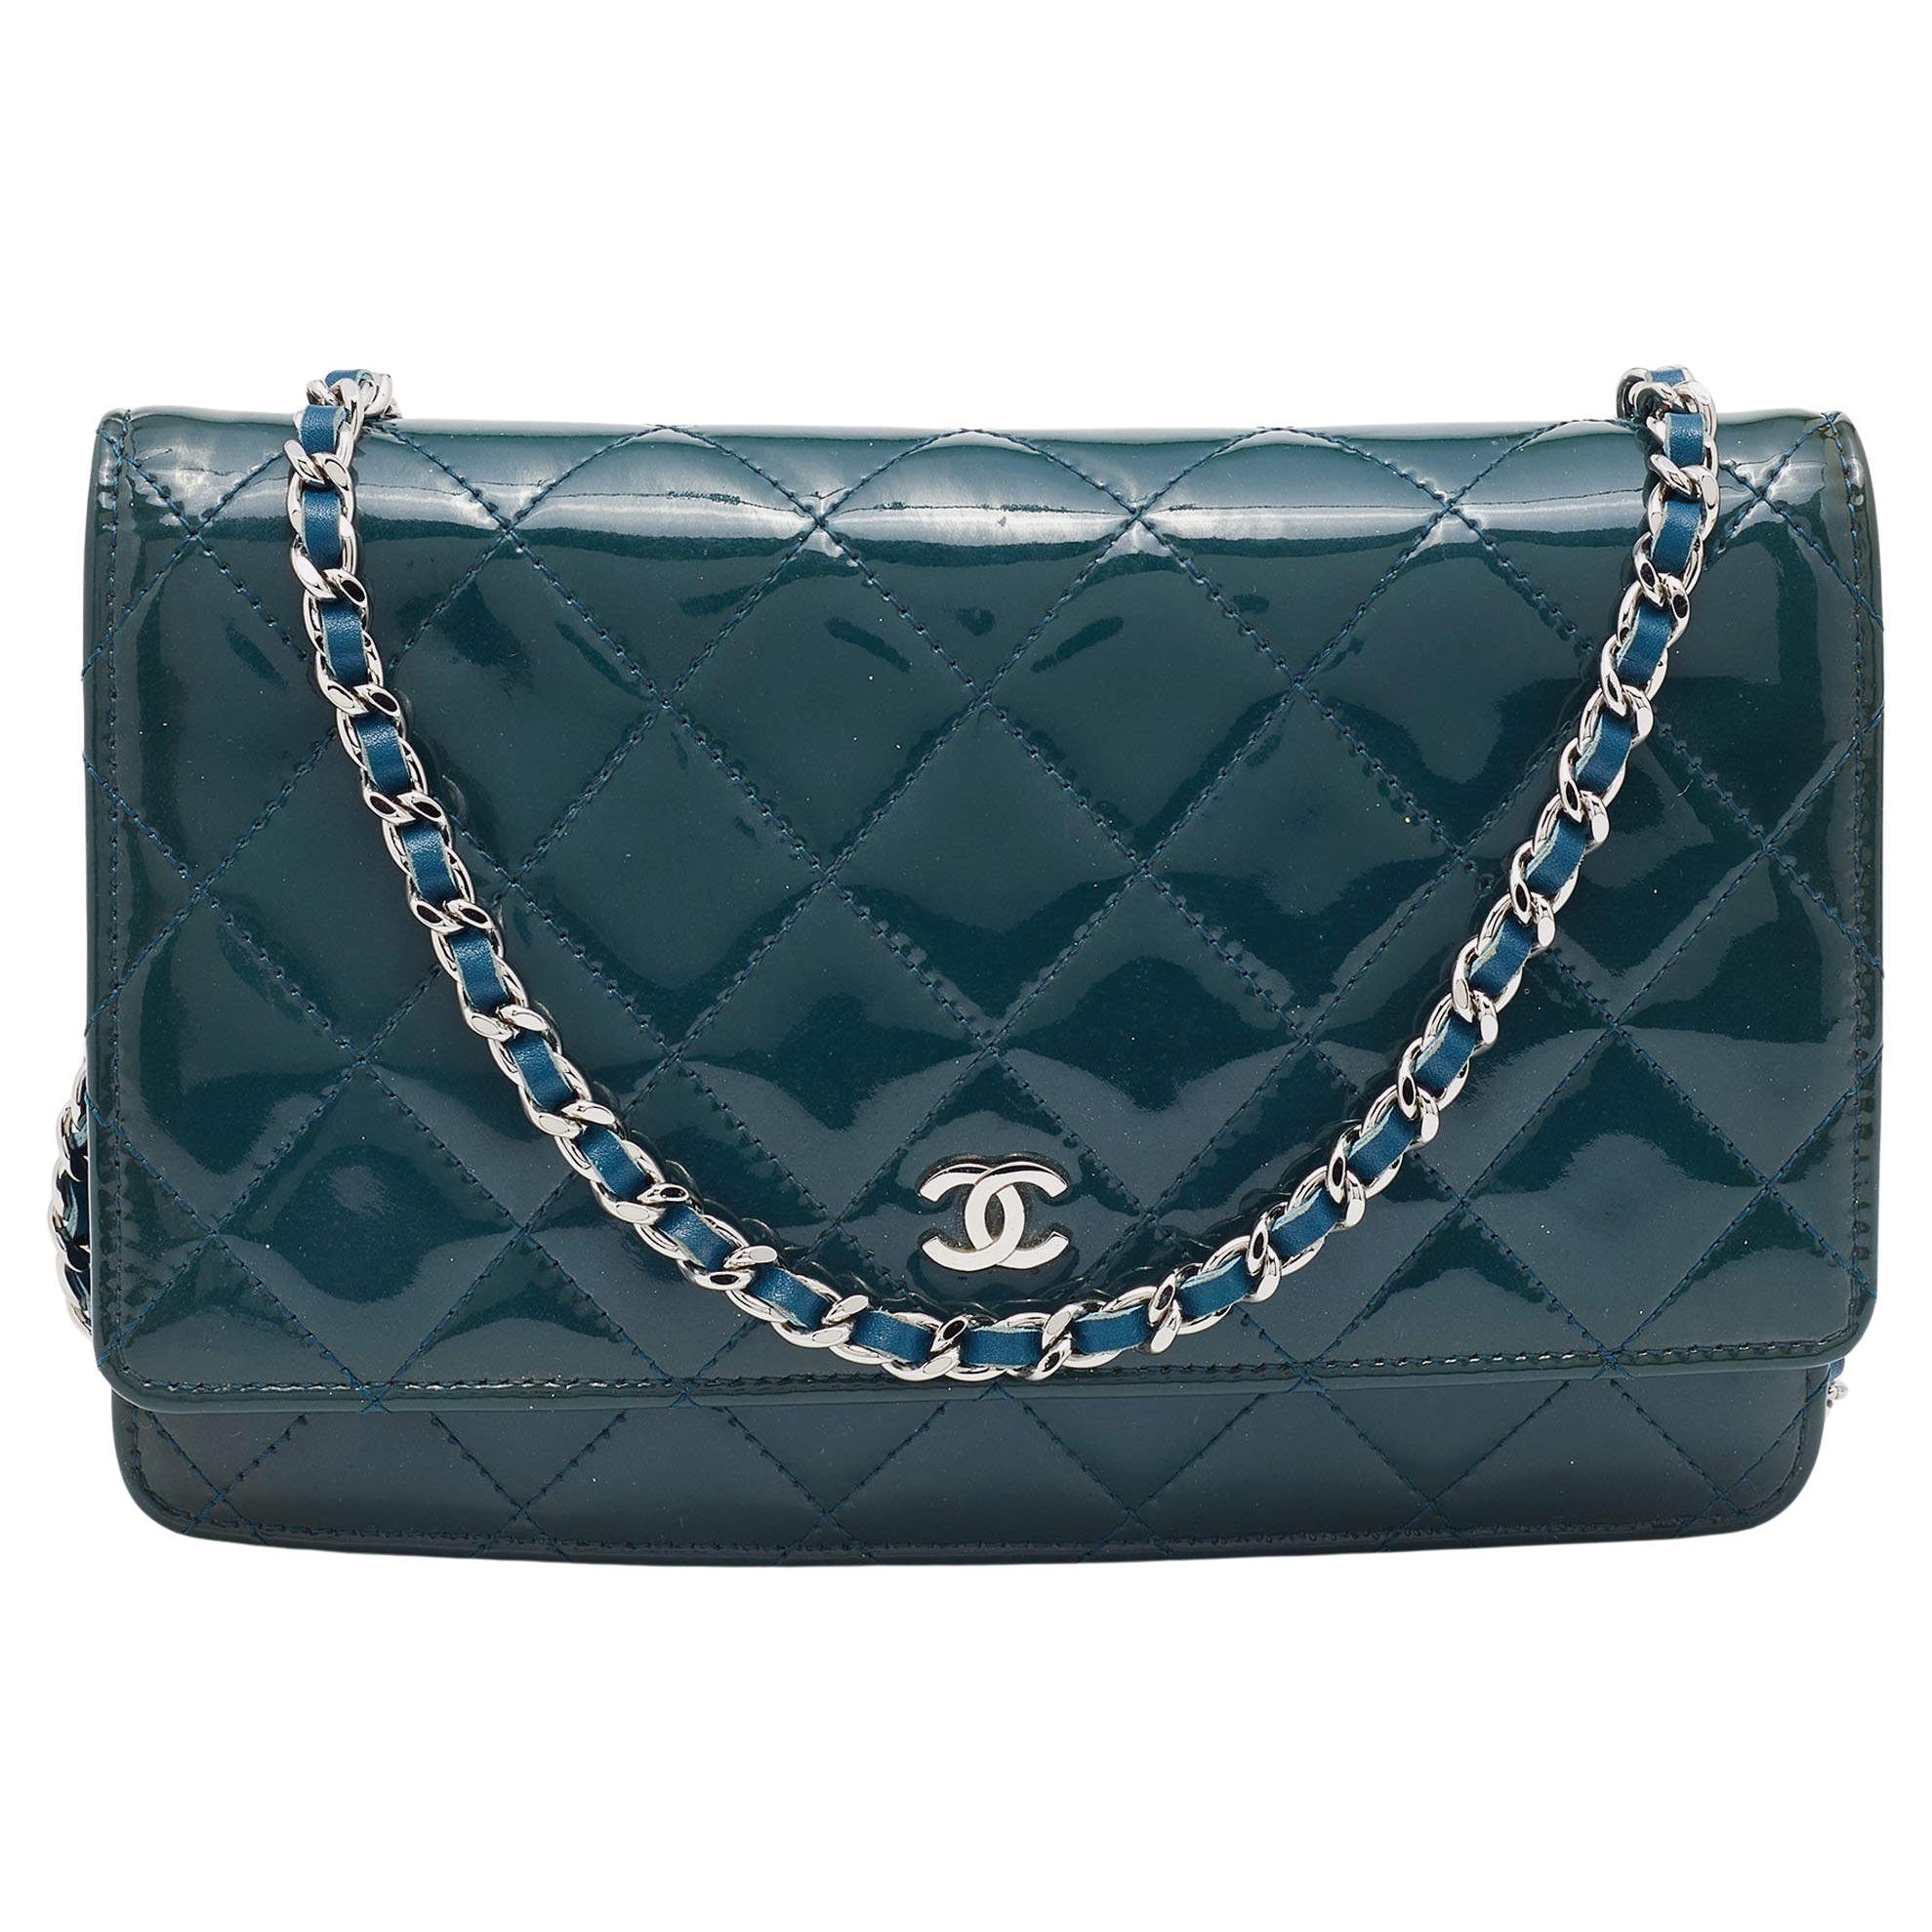 Chanel Teal Blue Quilted Patent Leather WOC Clutch